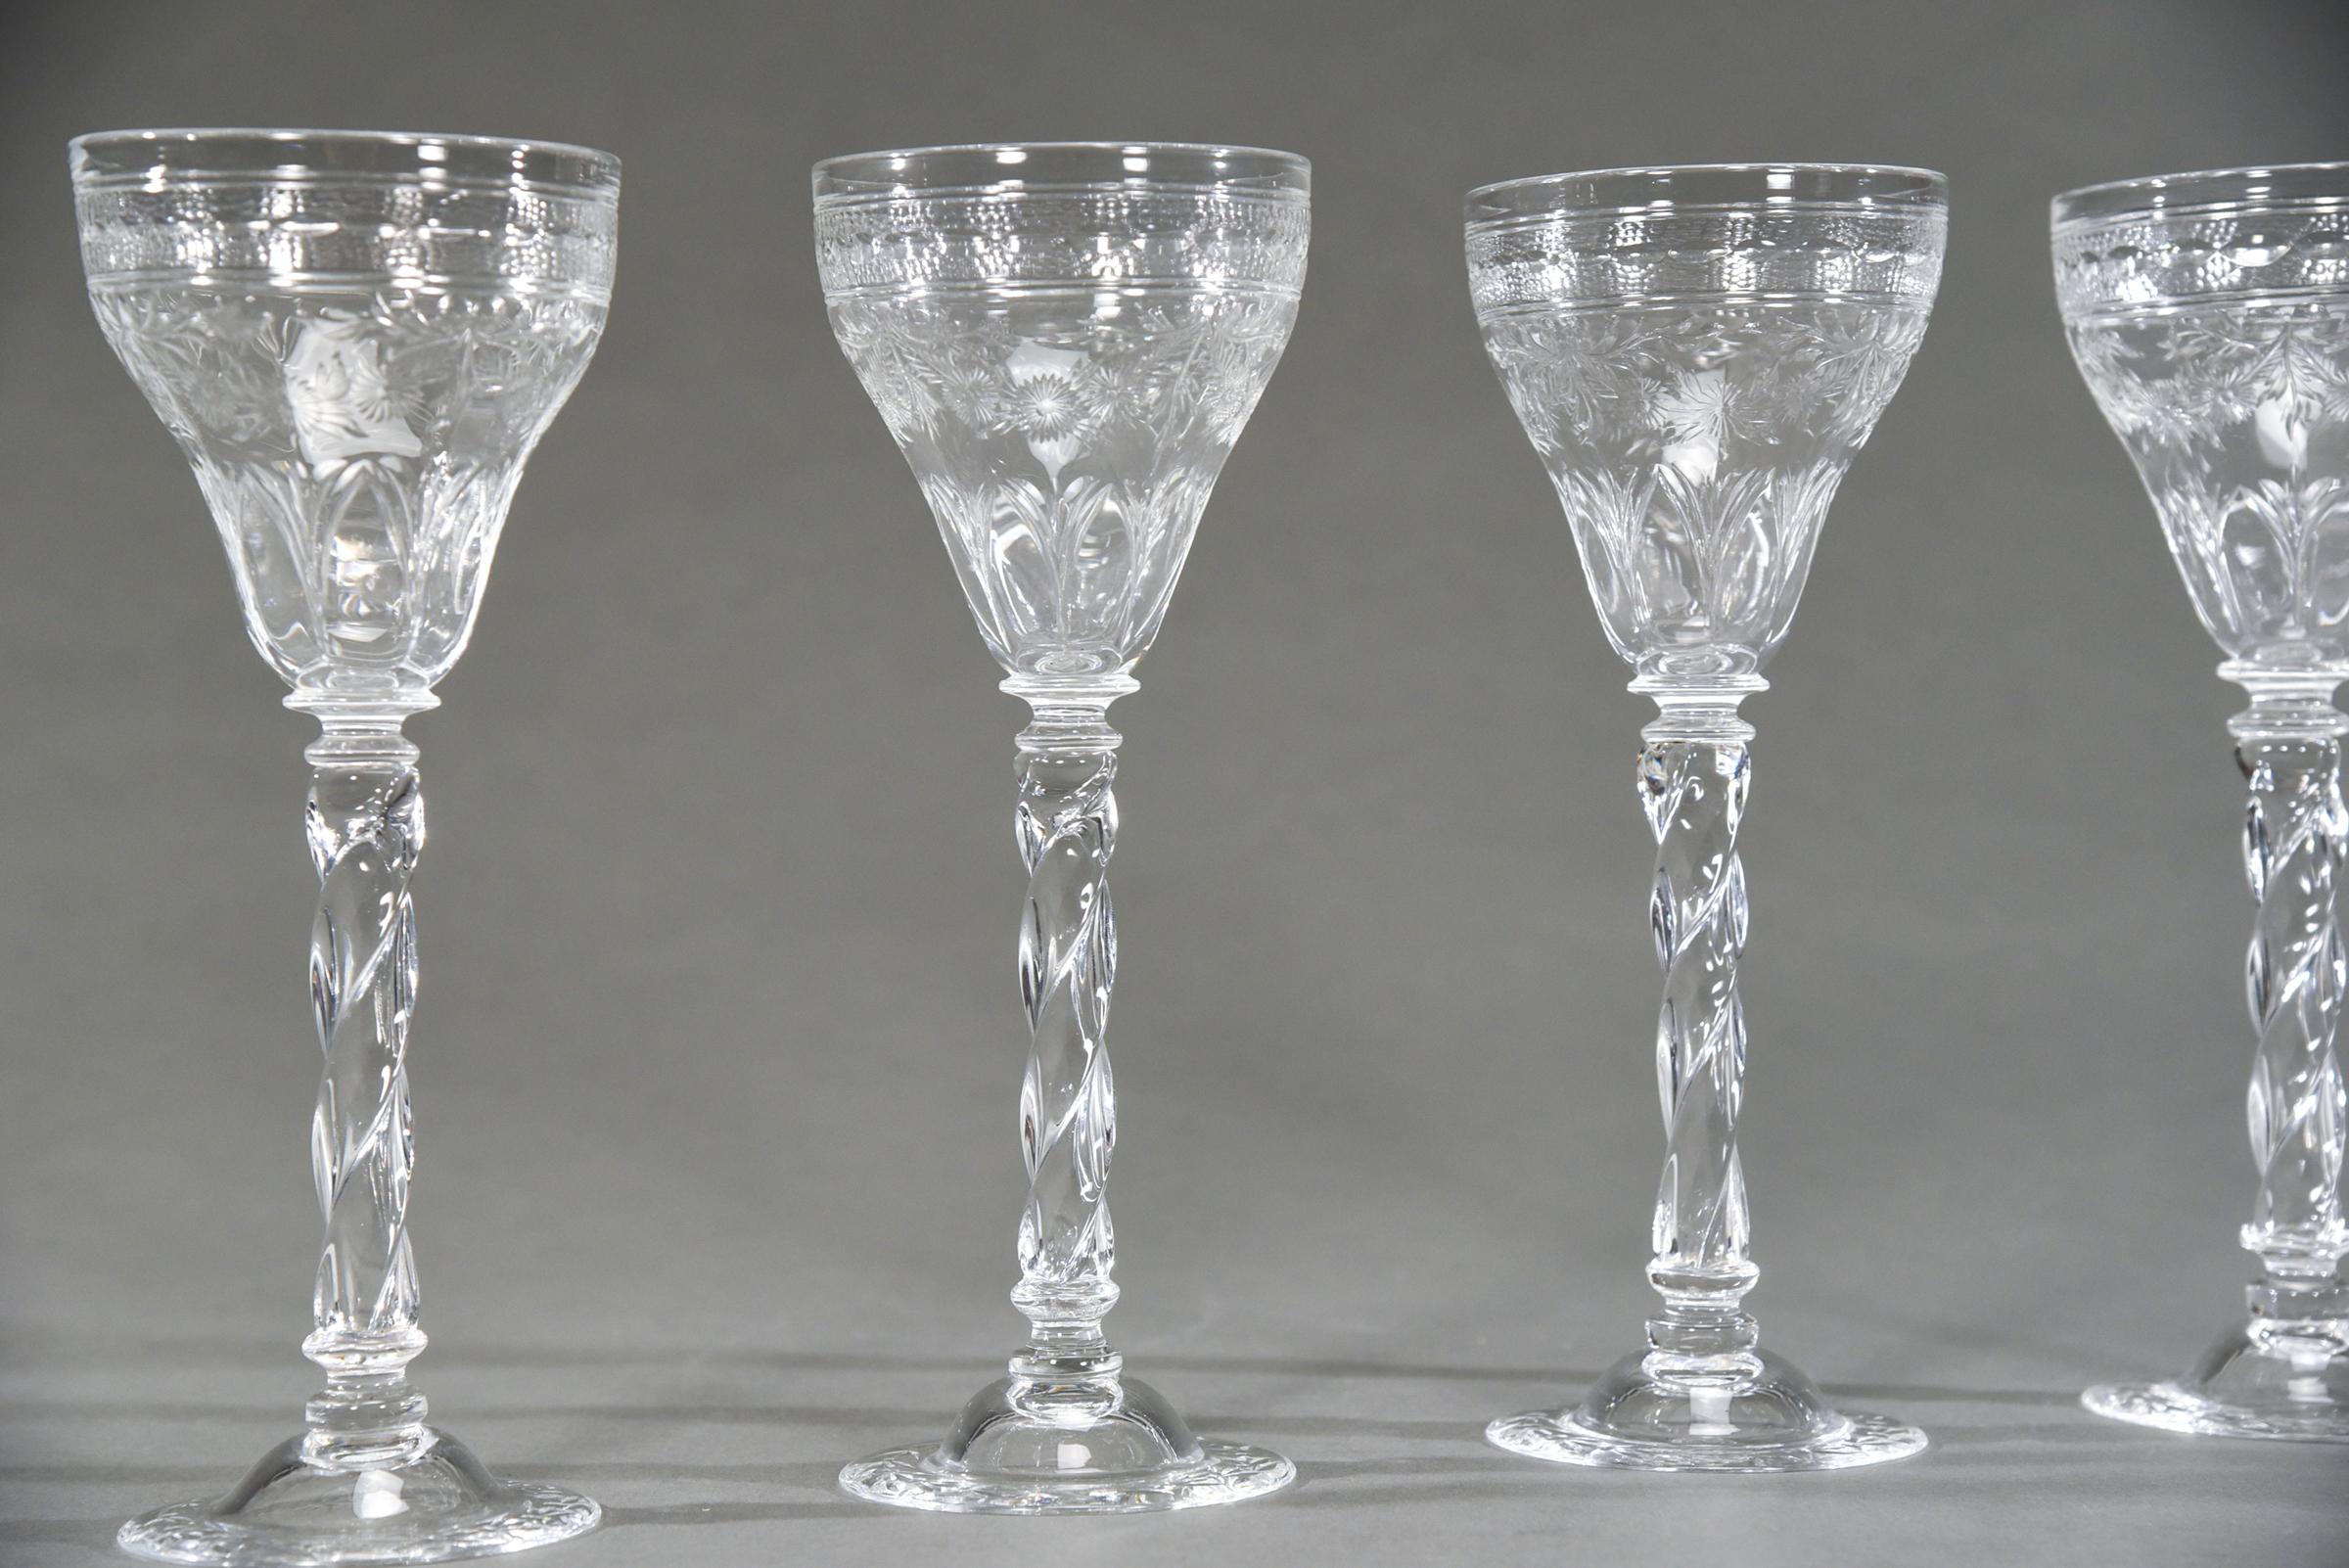 One the most dramatic and elegant patterns, this set of 12 Webb goblets will create a one of a kind table setting. Standing 9 3/8